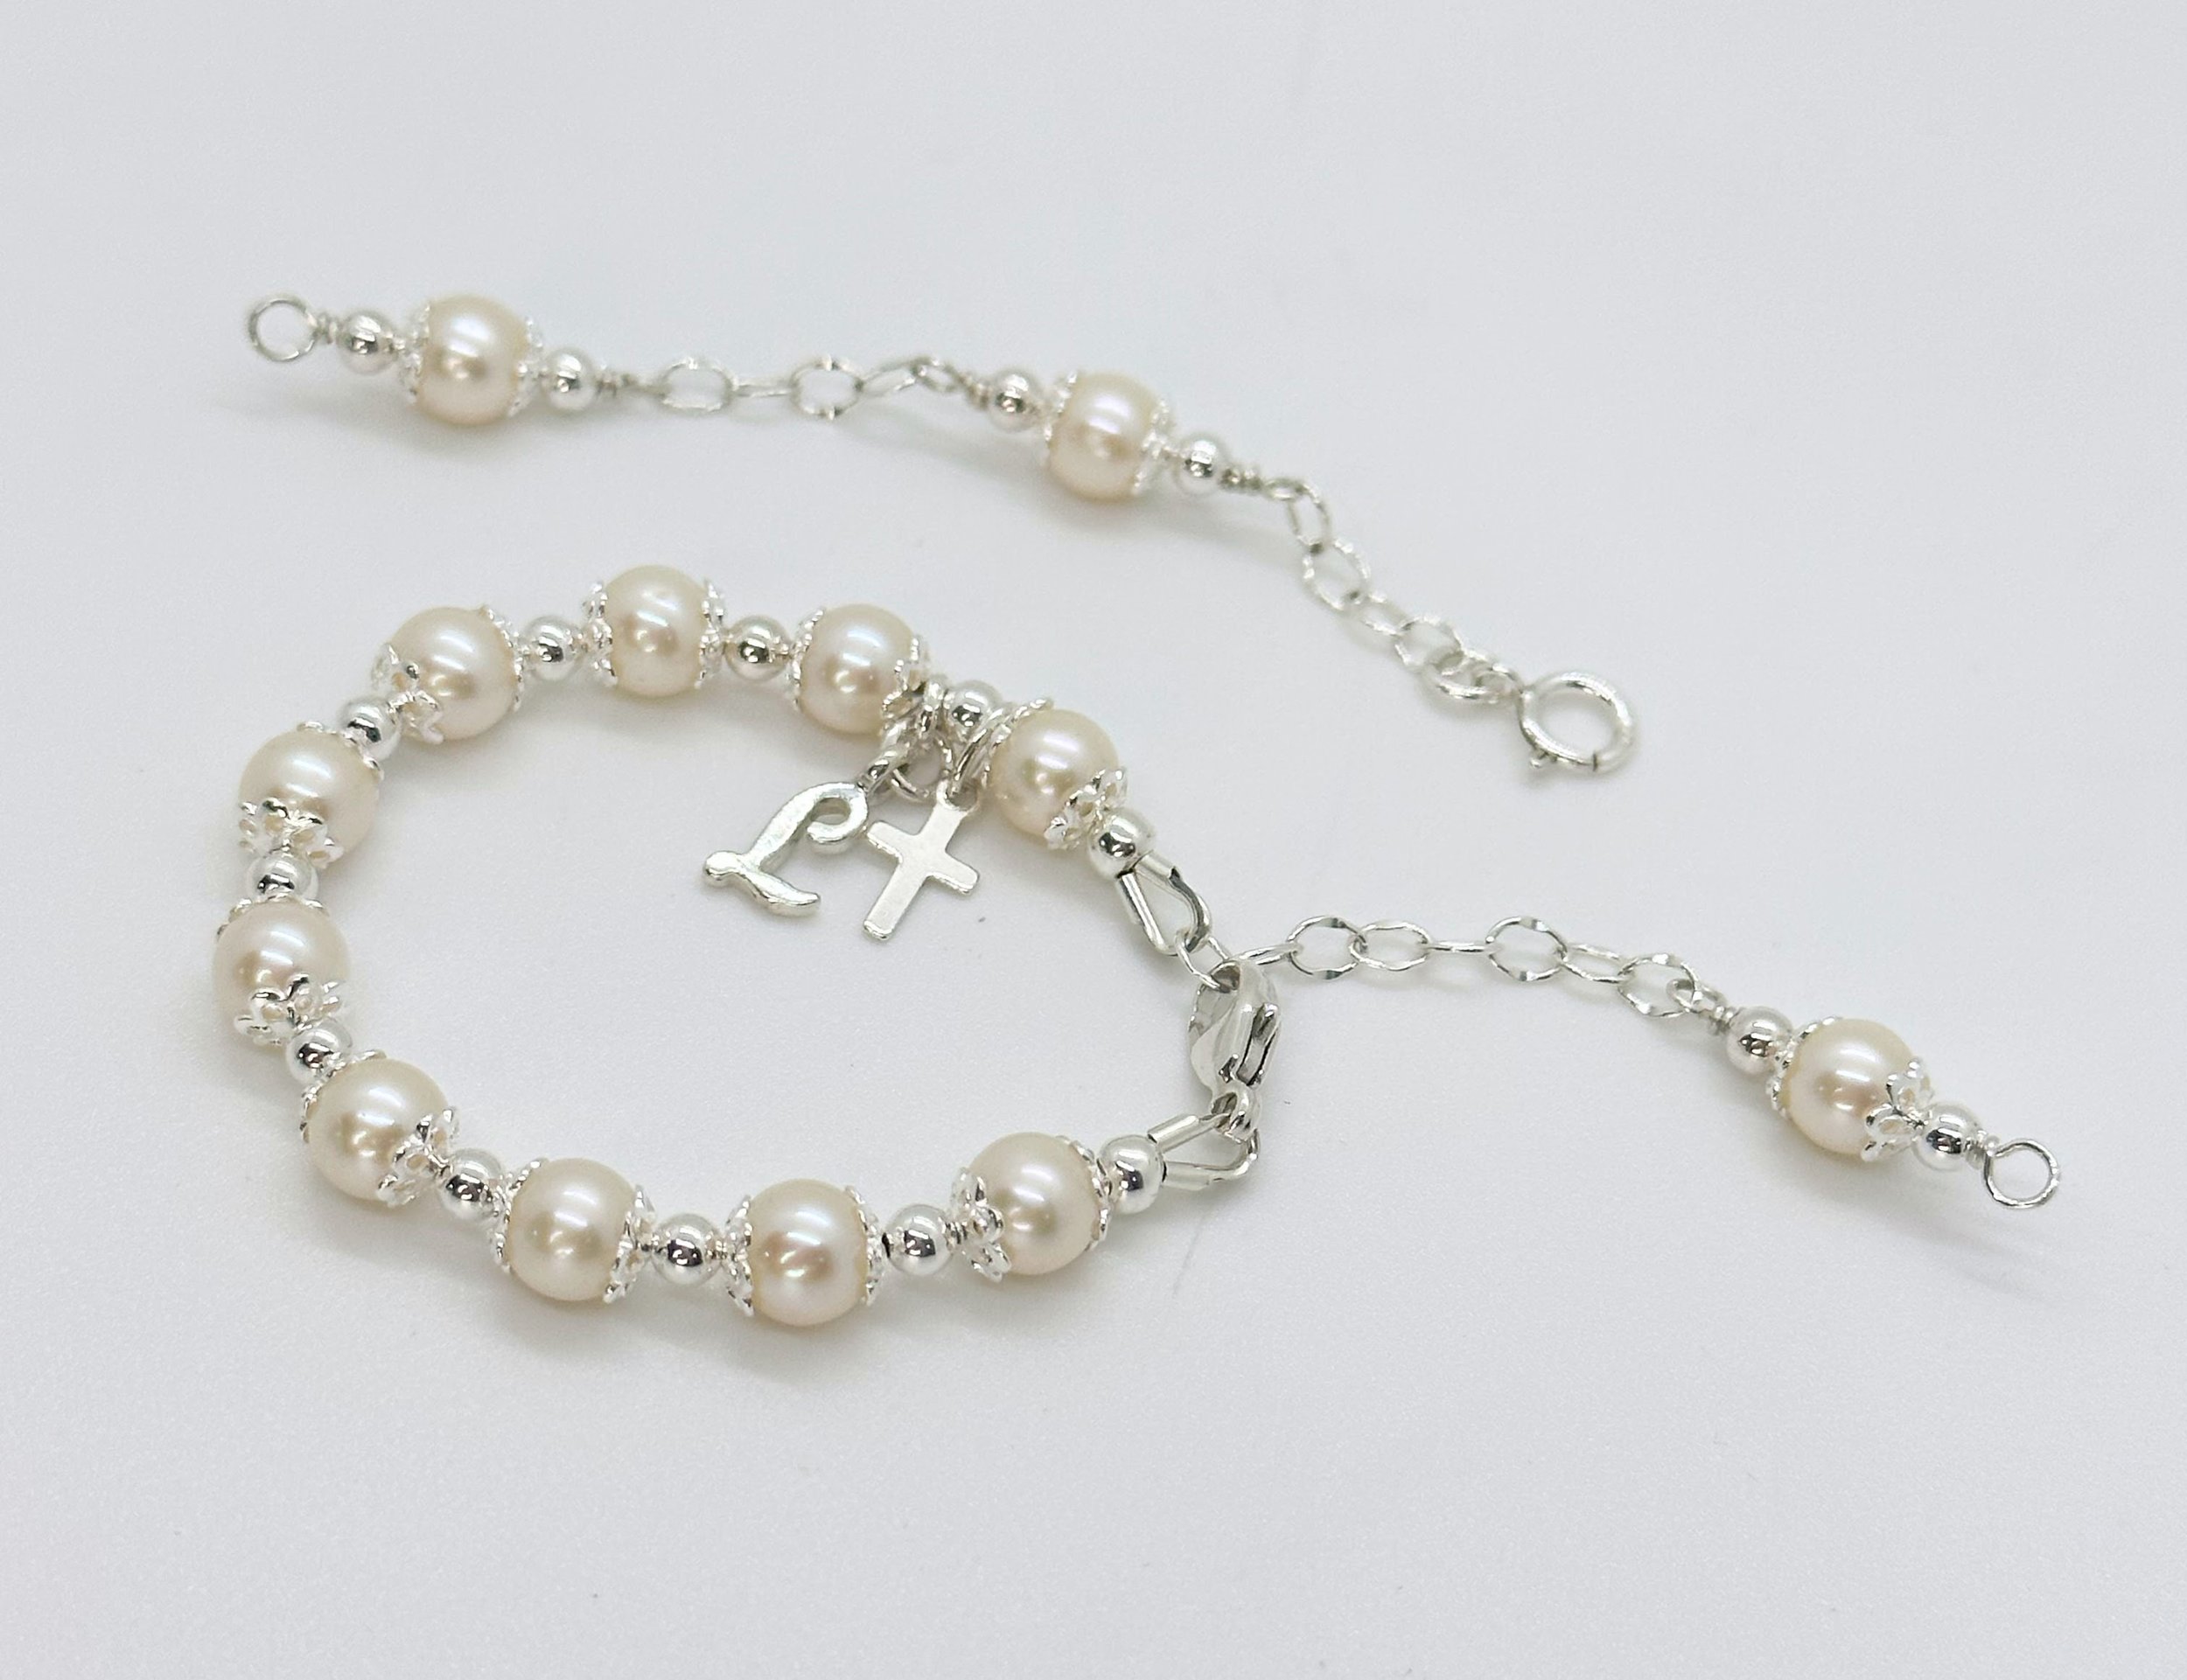 Little Blessing Baptism baby bracelet with white pearls and clear crystal  add sparkle to her big day! Charming Baptism jewelry for little girls.